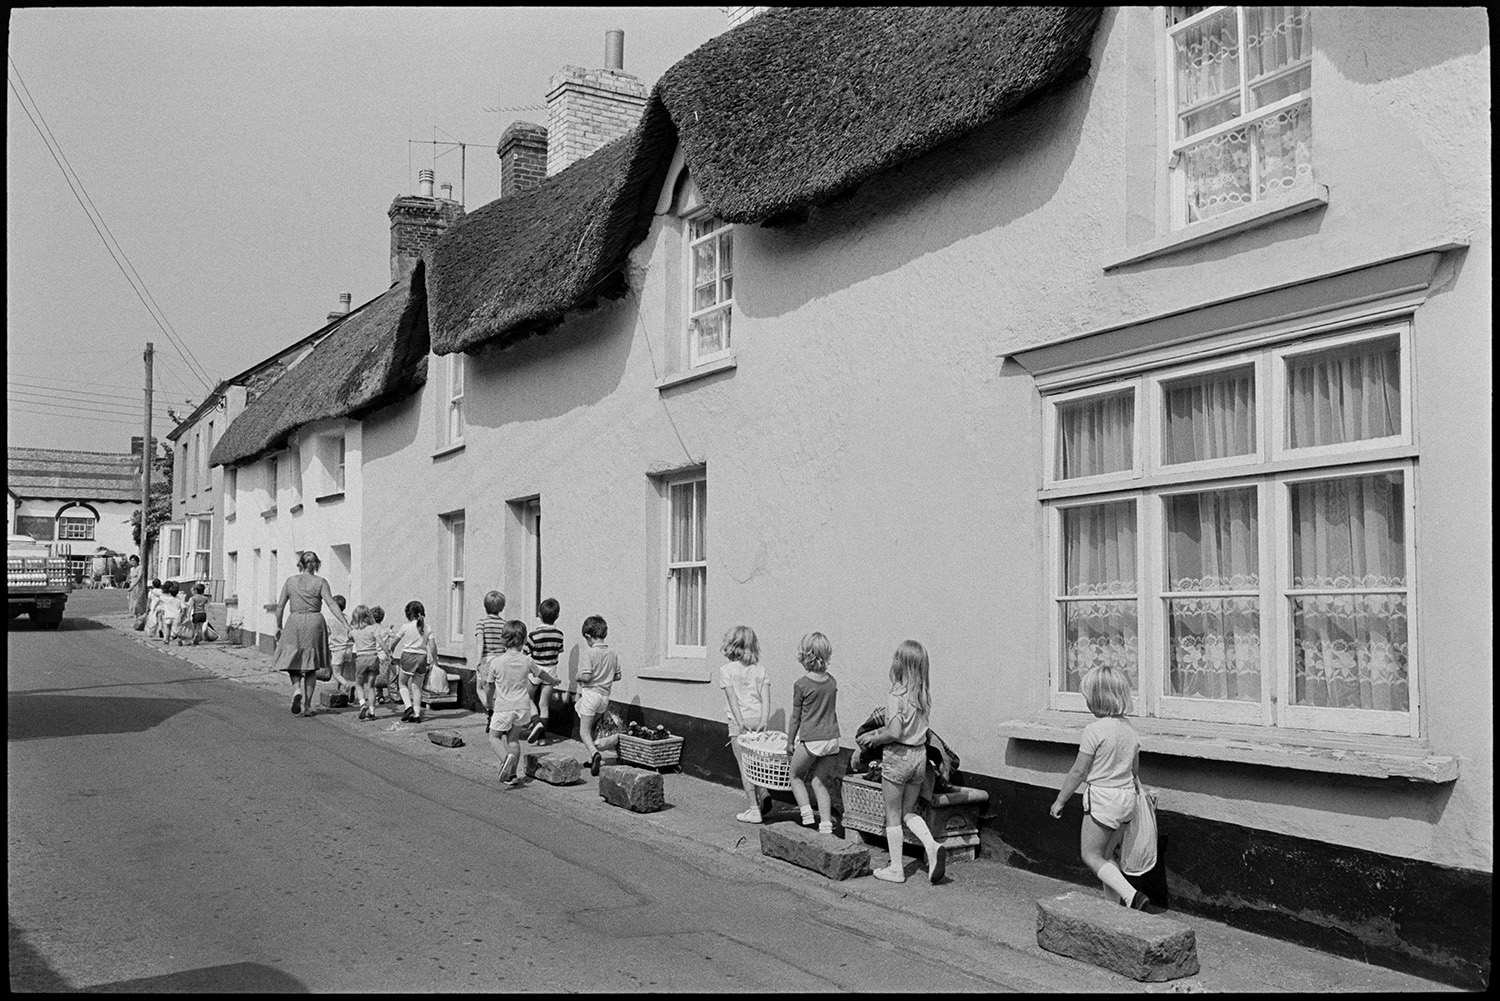 Street scene, schoolchildren going back to school after sports. 
[A teacher and group of school children walking past thatched cottages in Fore Street, Dolton, on their way back to school after a sports lesson. Some of the children are carrying baskets with sports equipment.]